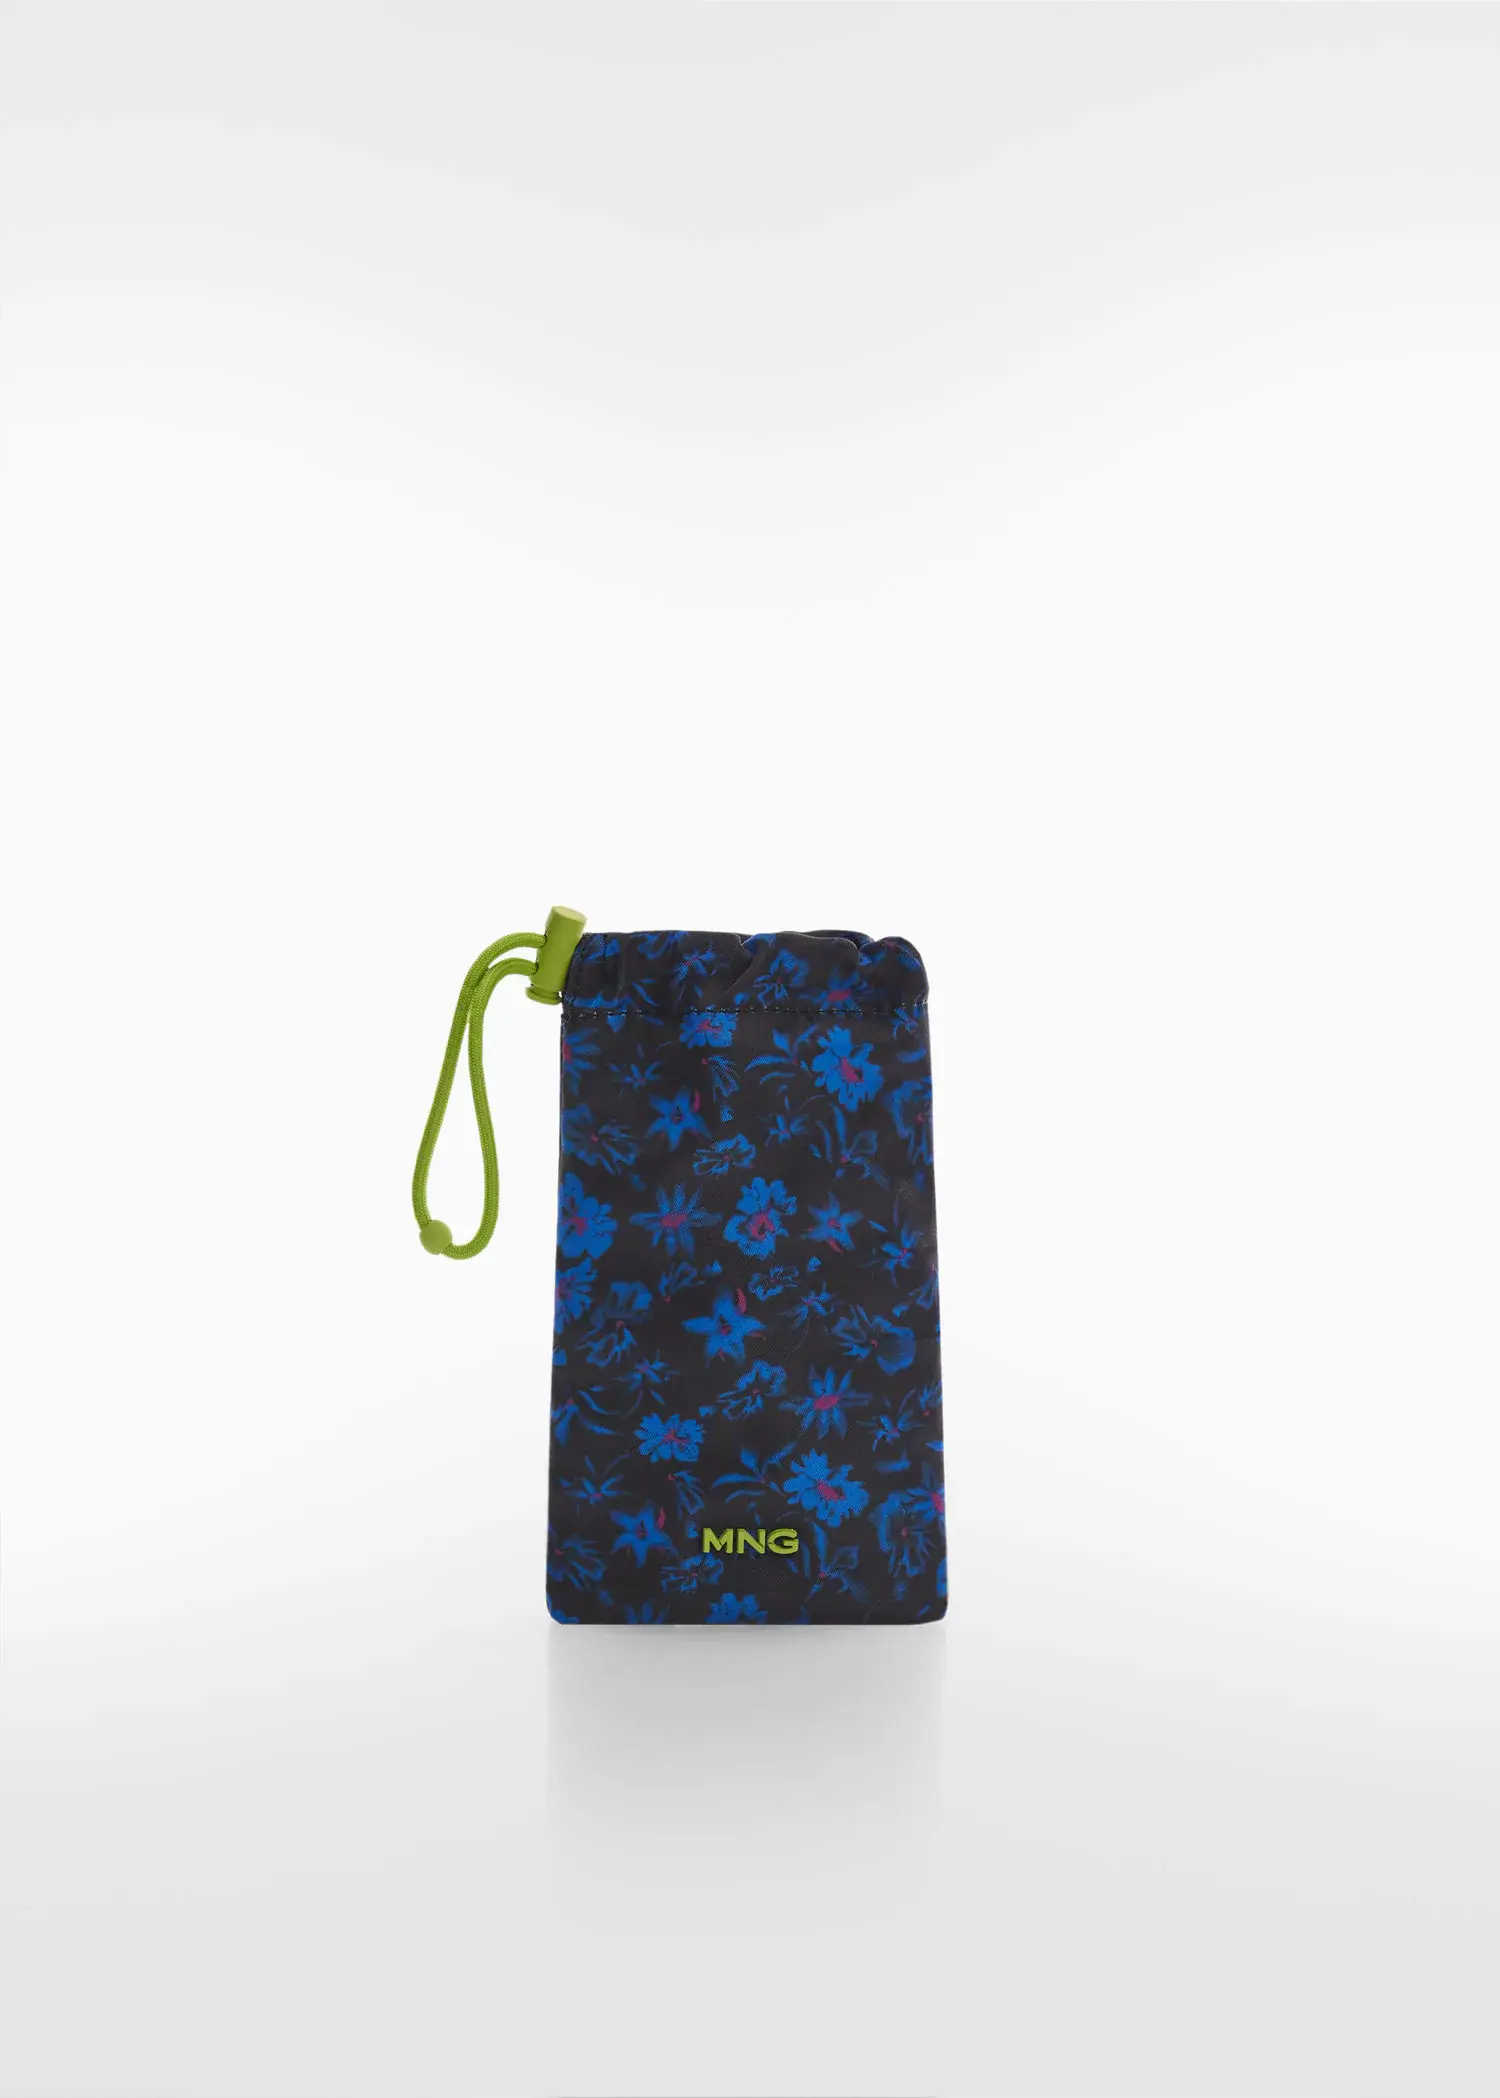 Mango Printed glasses case. a cell phone case is shown on a white background. 